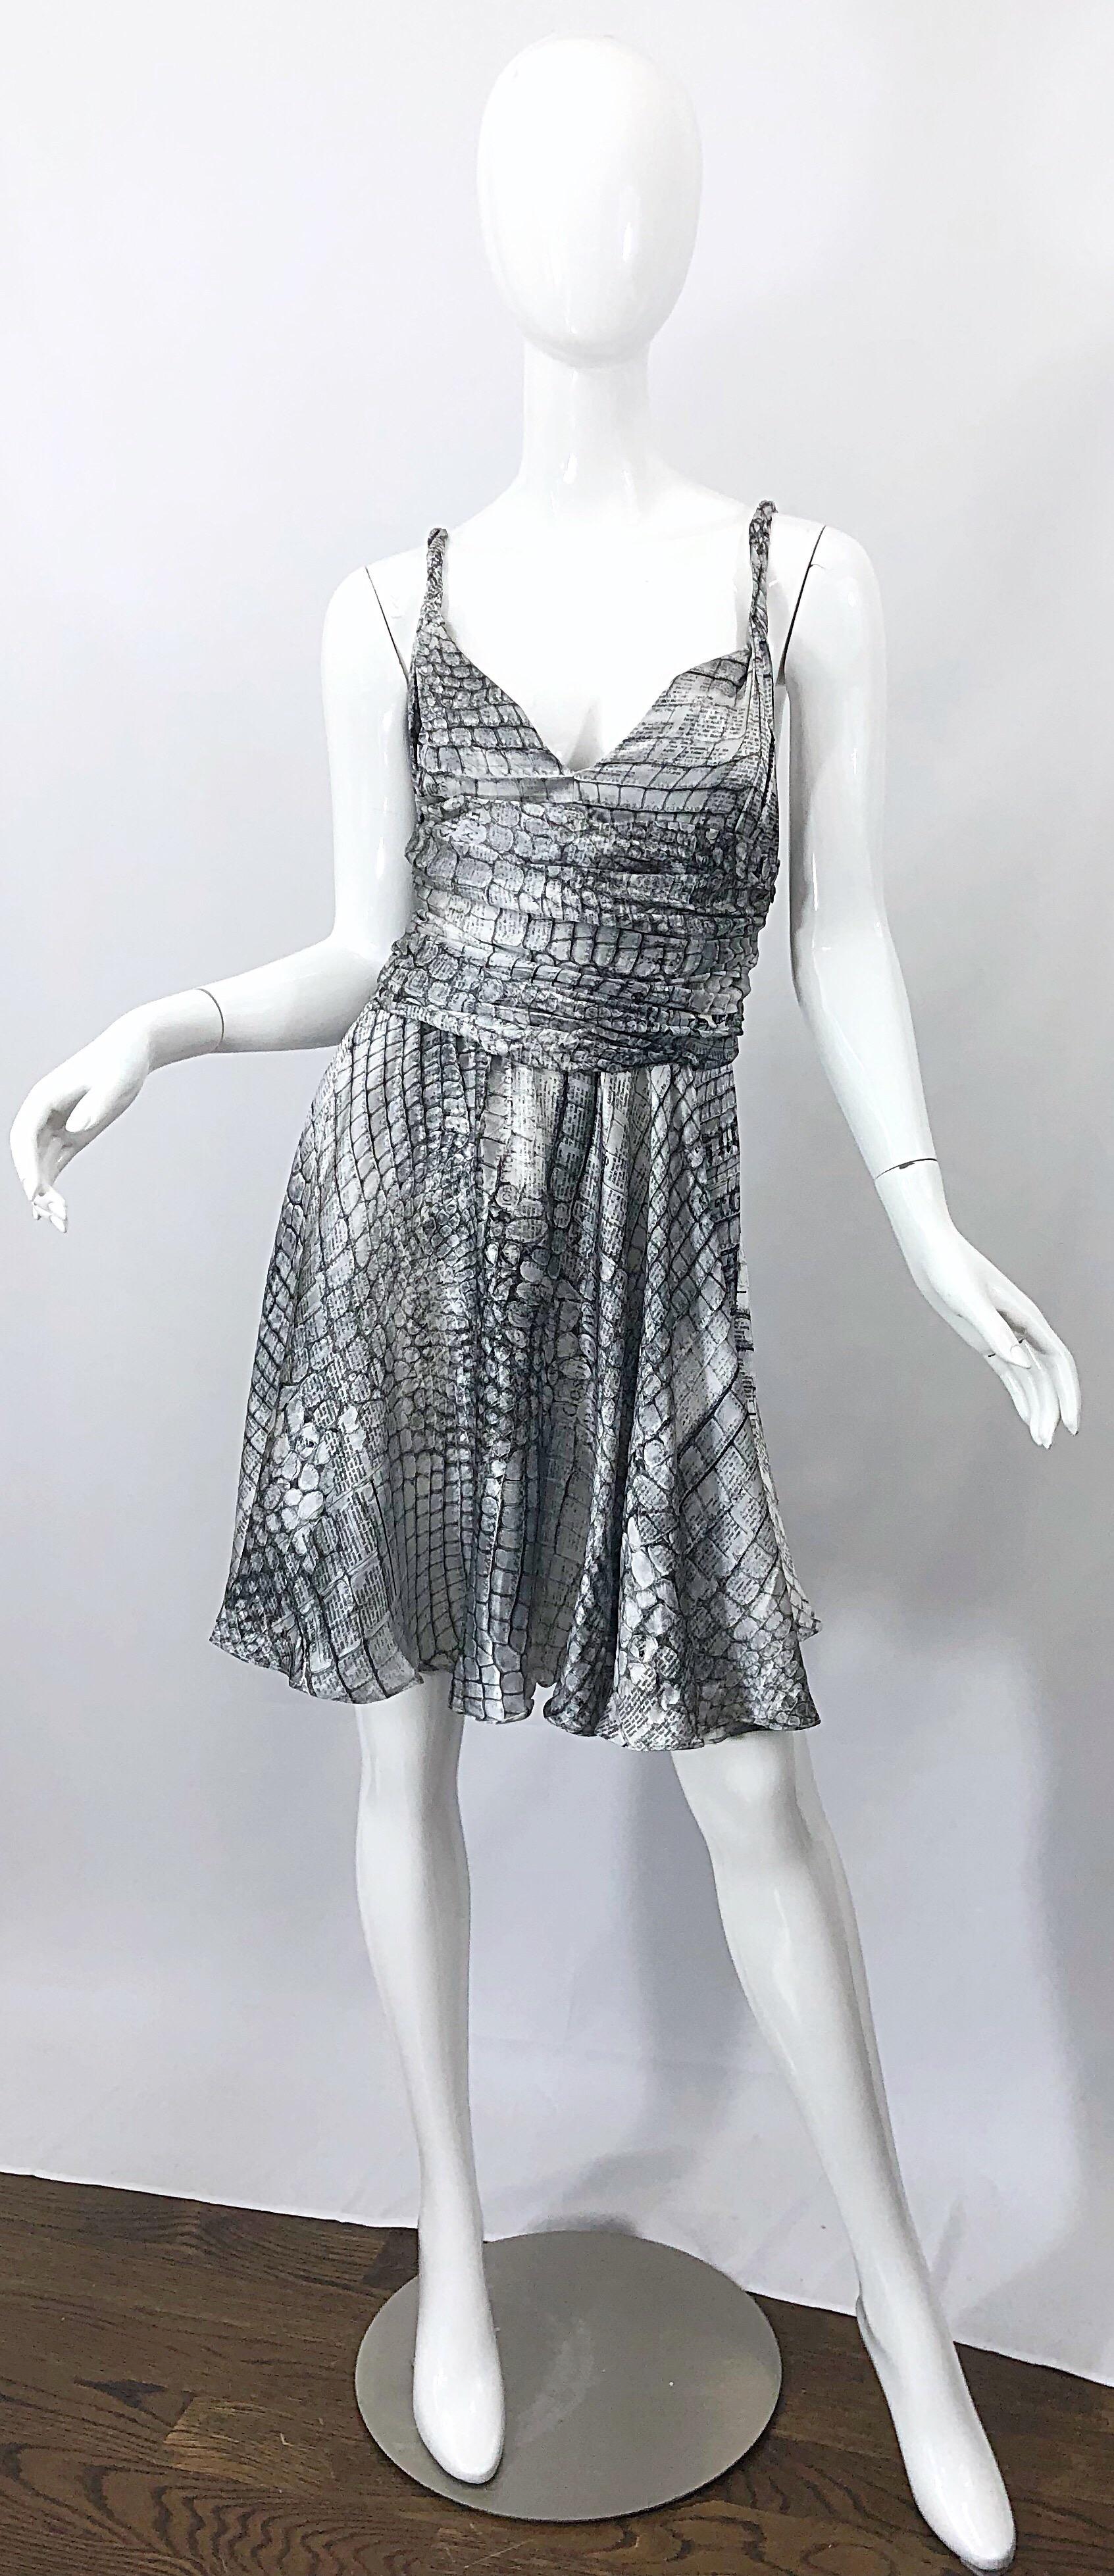 Flirty early 2000s ( Spring 2005 ) JOHN GALLIANO signature gazette print sleeveless black and white (and grey) silk dress! Features Galliano's signature newspaper print mixed with alligator / crocodile prints throughout. Sleeveless braided straps.